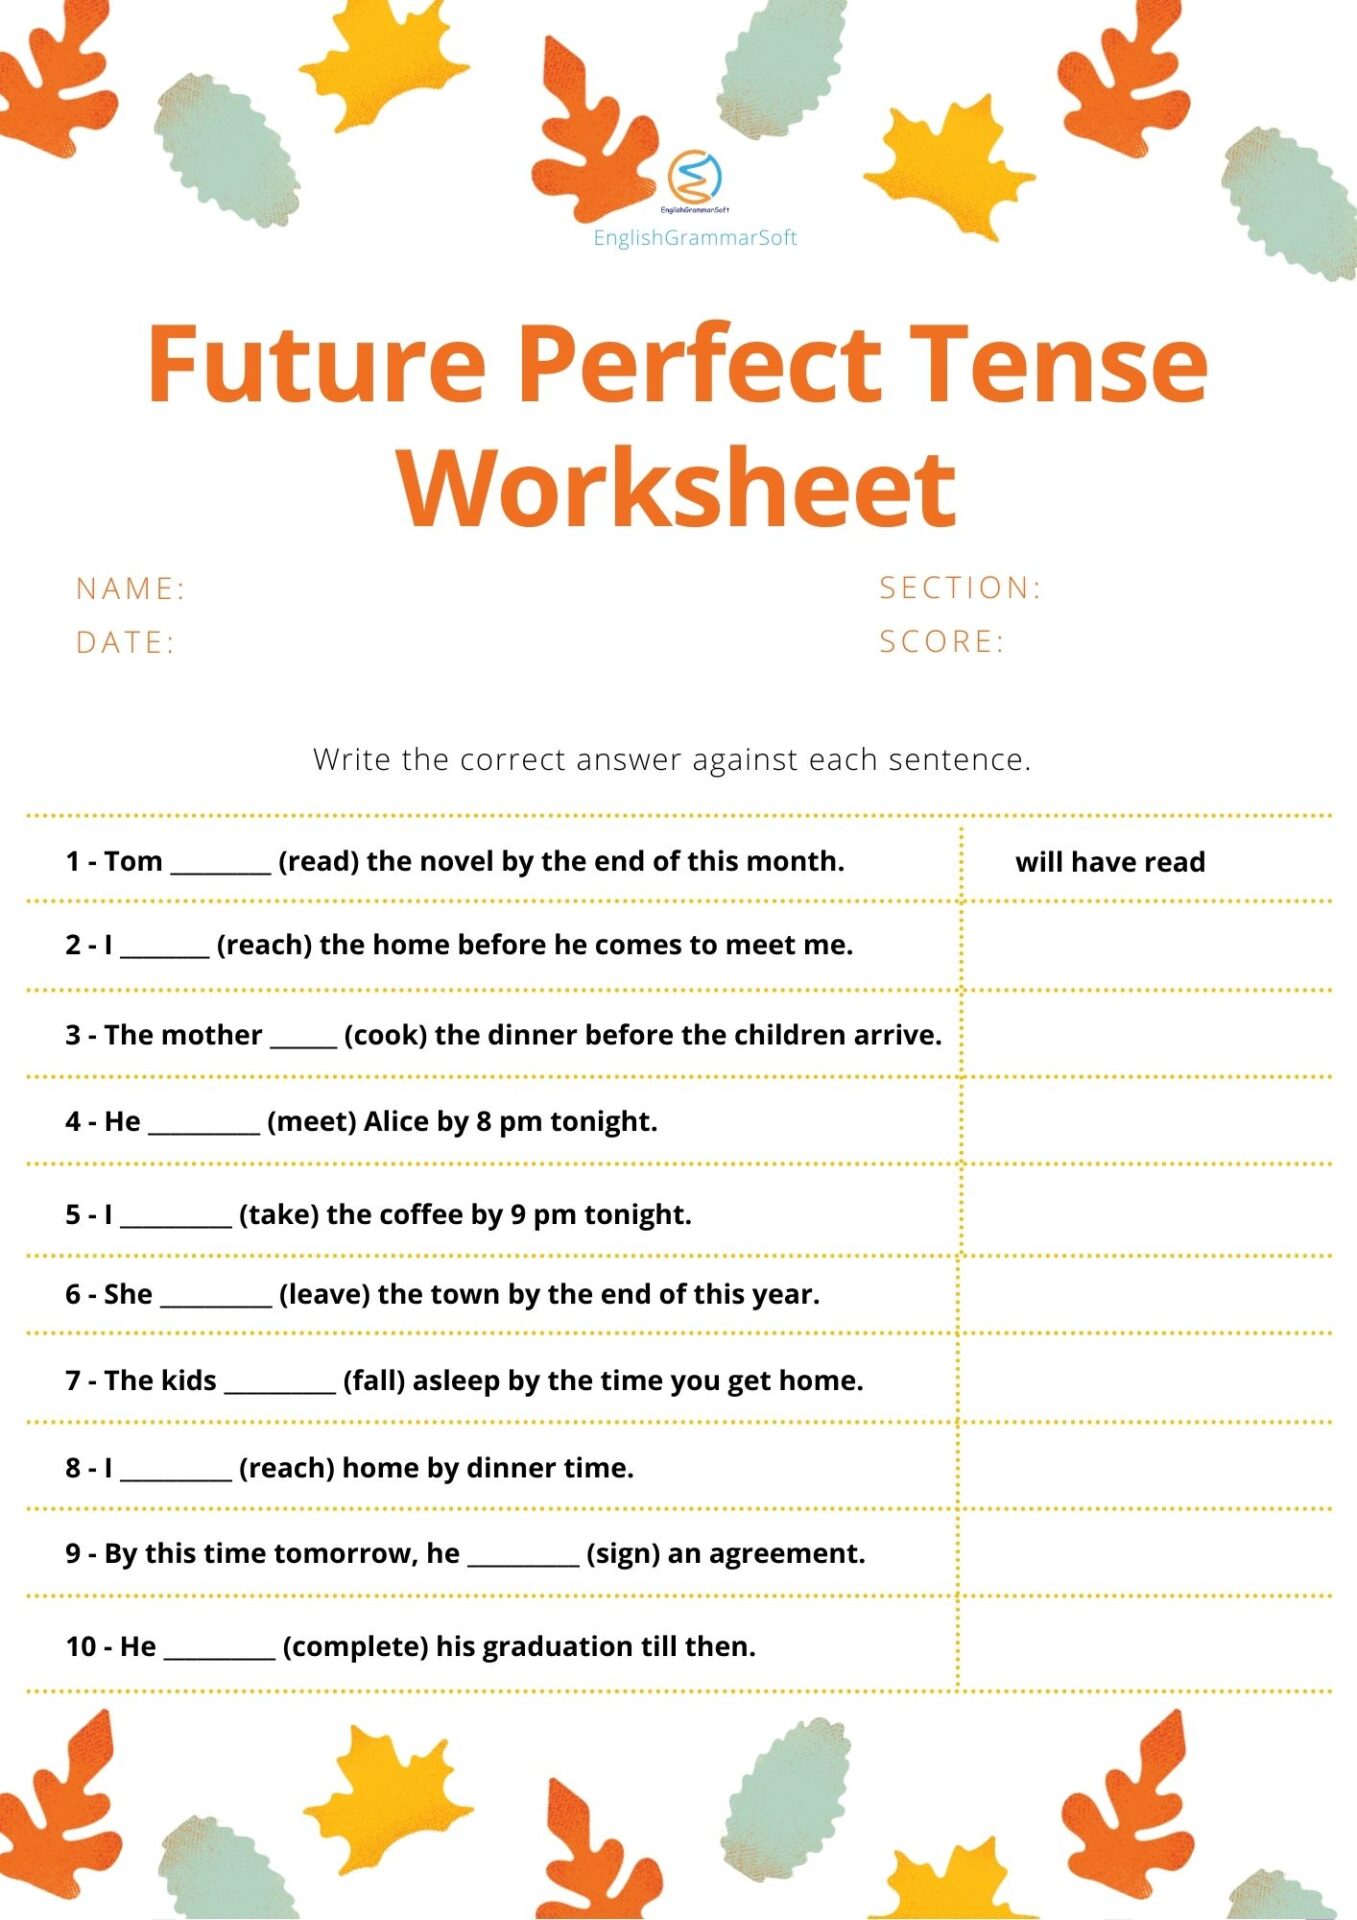 Worksheets on Future Perfect Tense